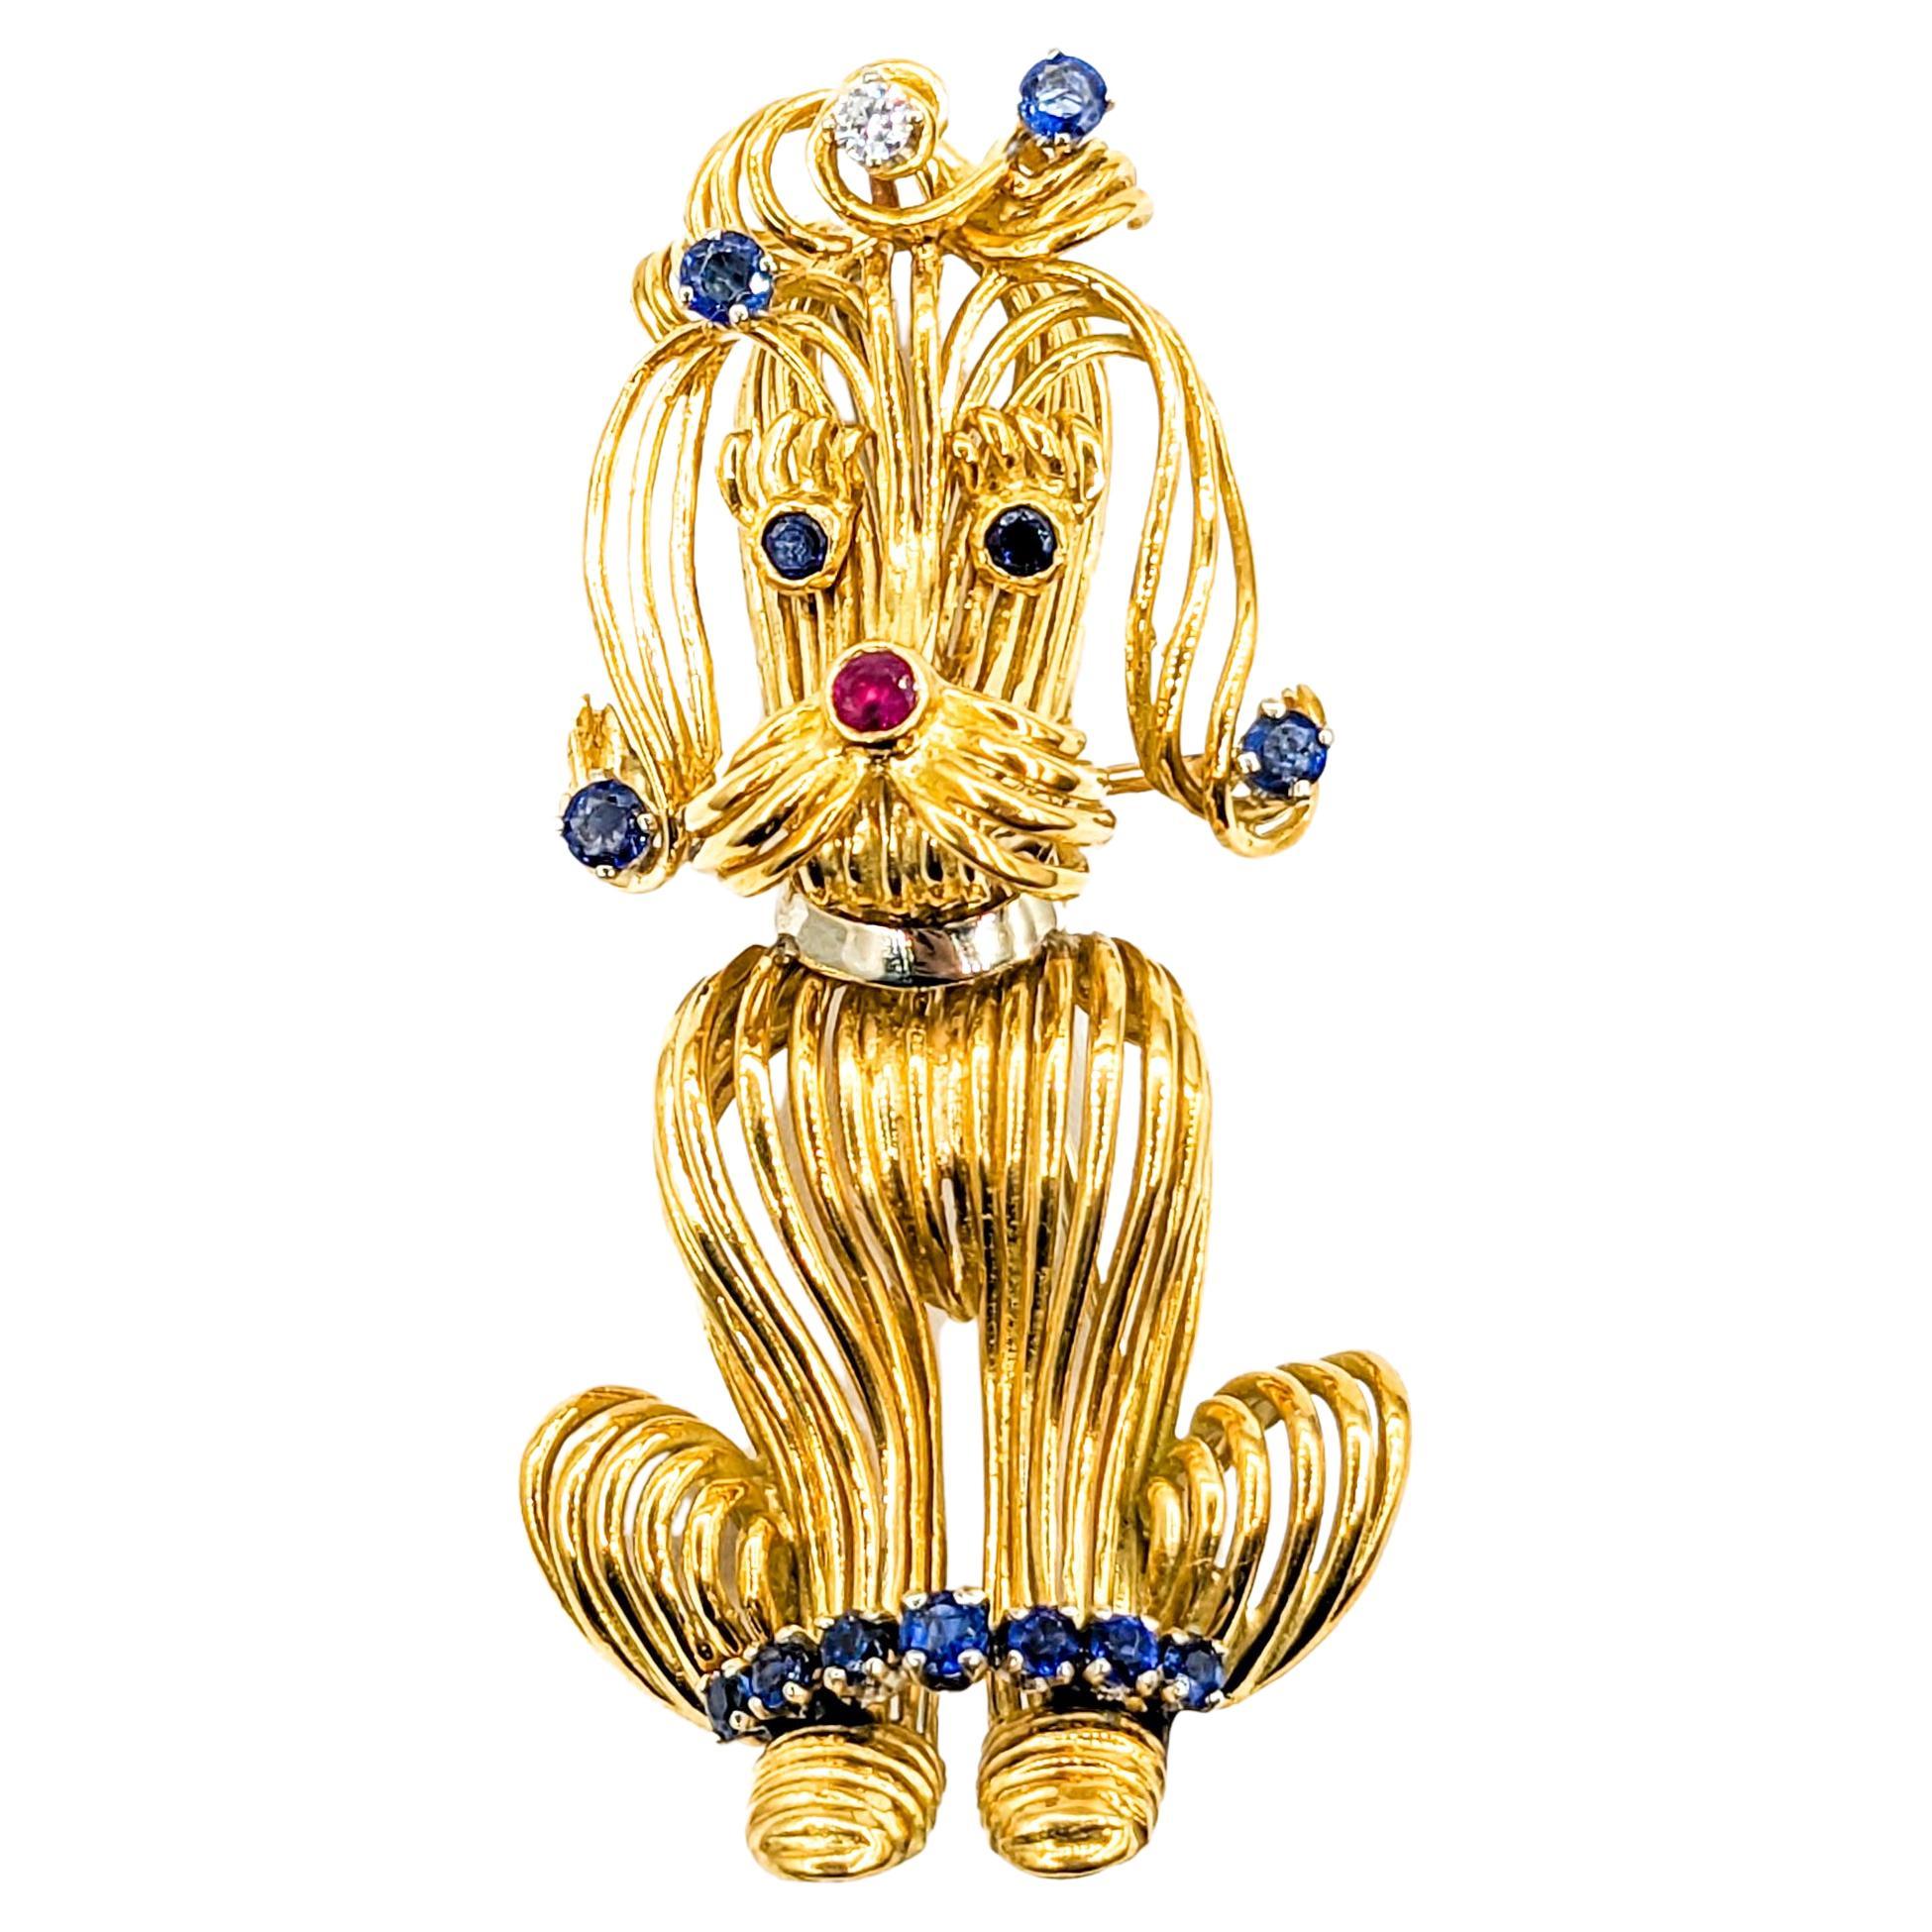 Darling Mid-Century Poodle Dog Brooch with Sapphires, Ruby & Diamonds 18K